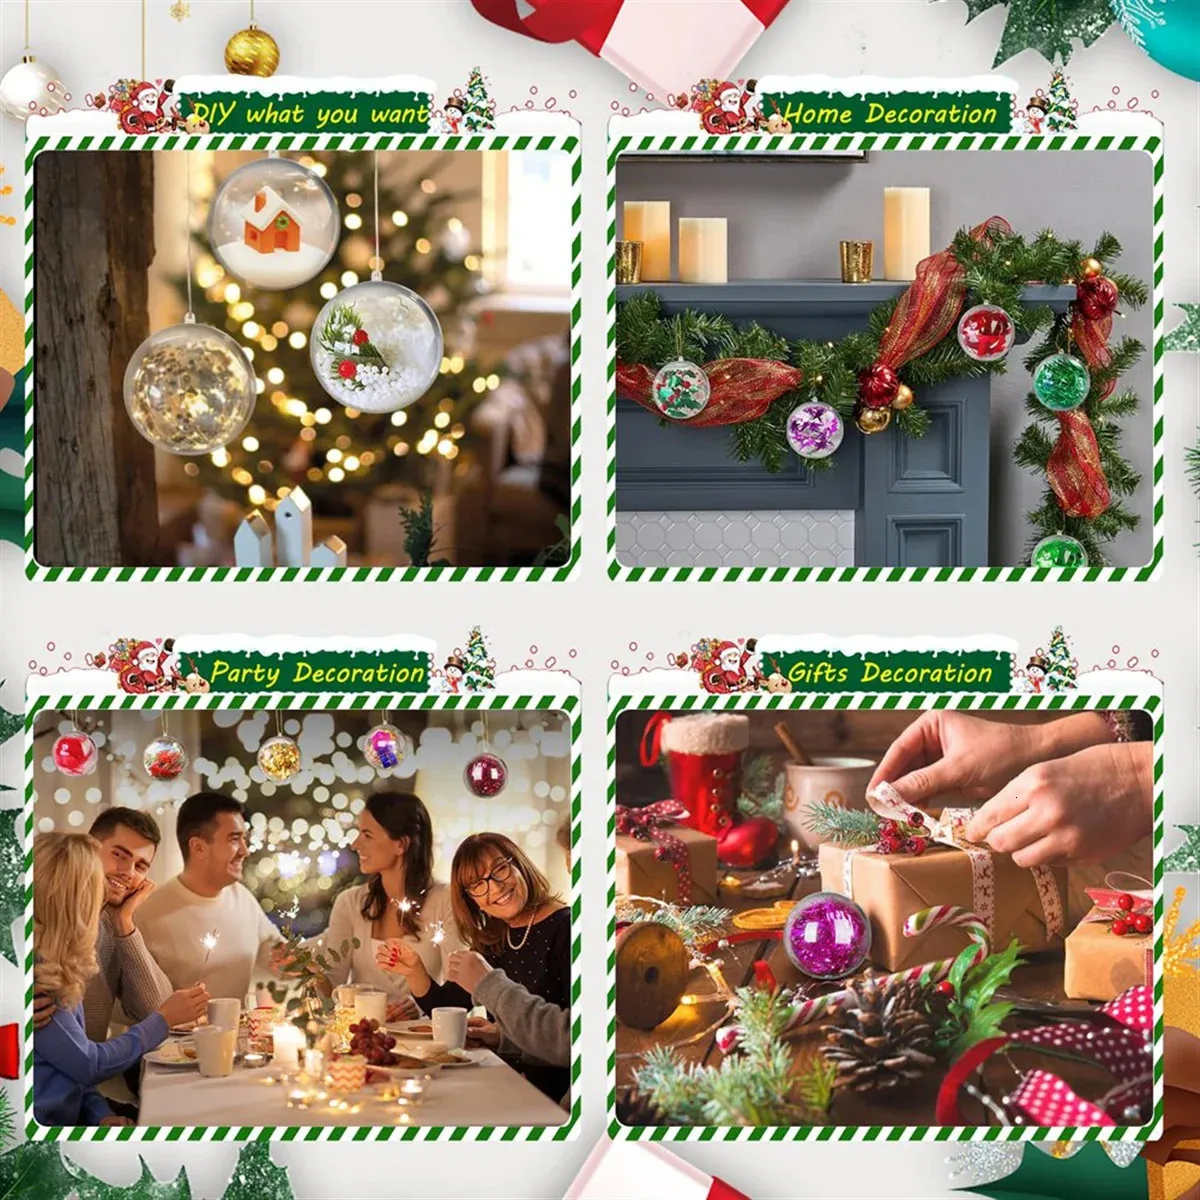 5cm Fillable Plastic Ornaments For DIY Christmas Metal Rings For Crafts  A231018 From Long10, $14.26